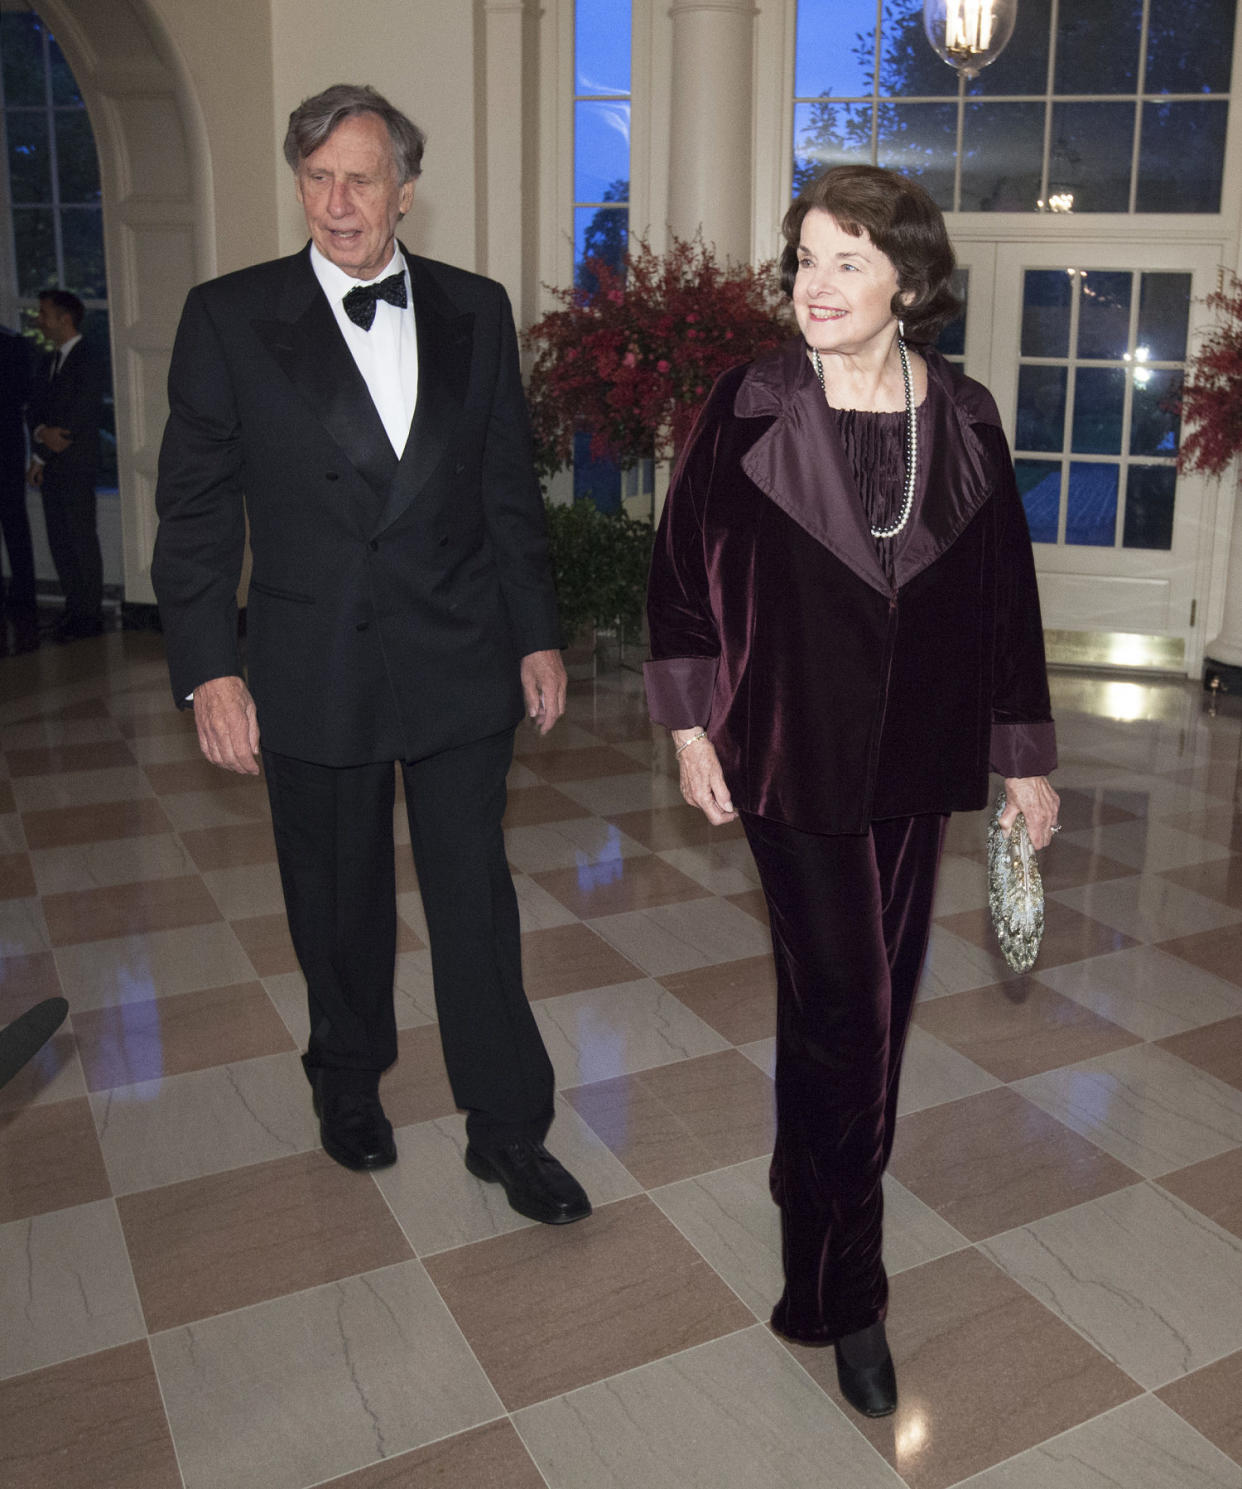 Dianne Feinstein and Richard Blum (Chris Kleponis-Pool / Getty Images)